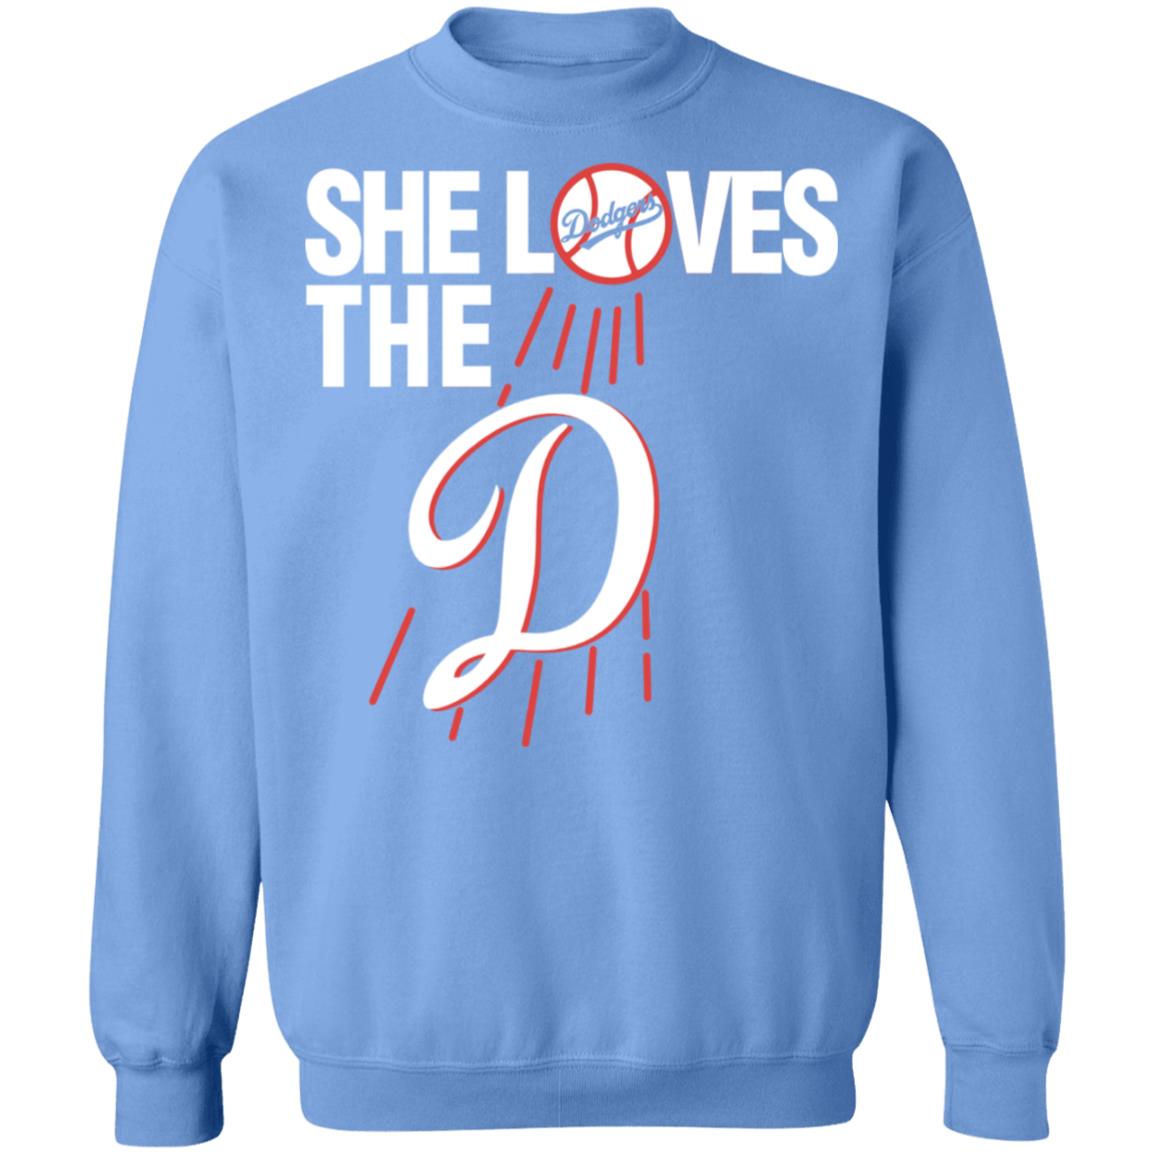 She Wants The D Los Angeles Dodgers – Tees Geek